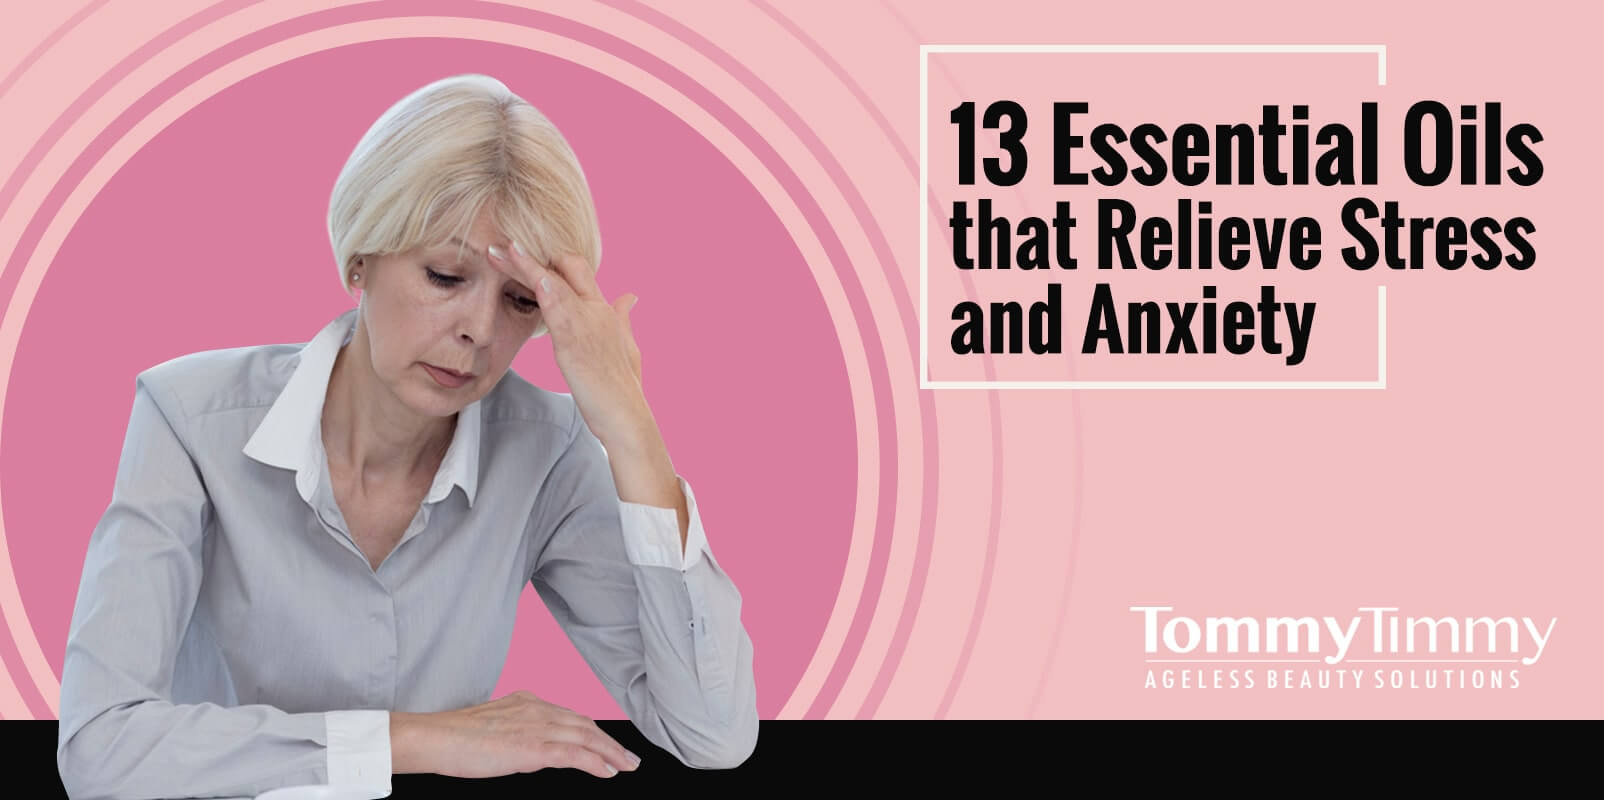 13 Essential Oils that Relieve Stress and Anxiety